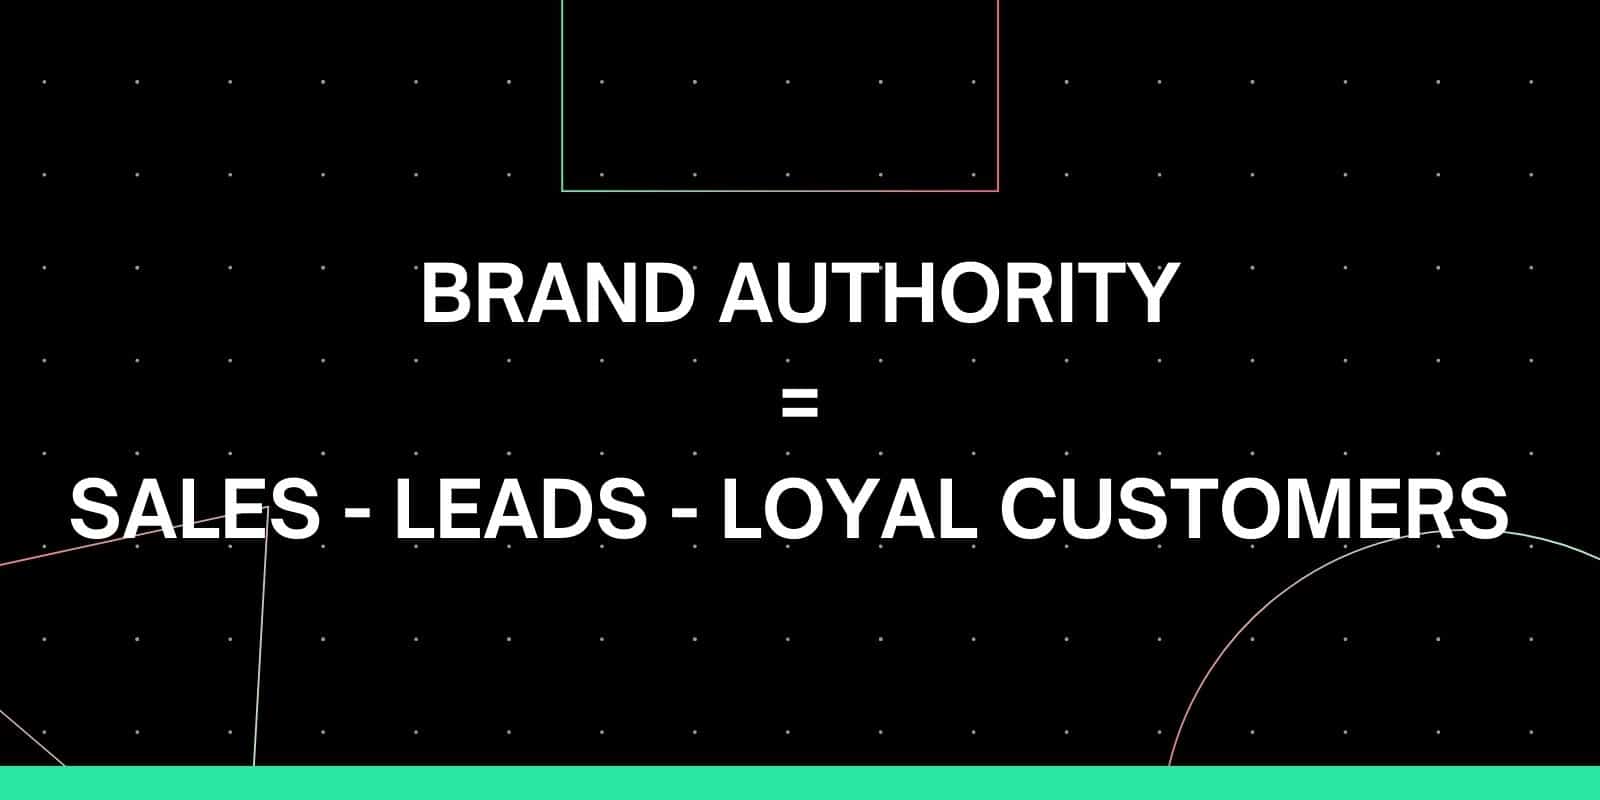 How To Build Brand Authority With SEO - The Definitive Guide